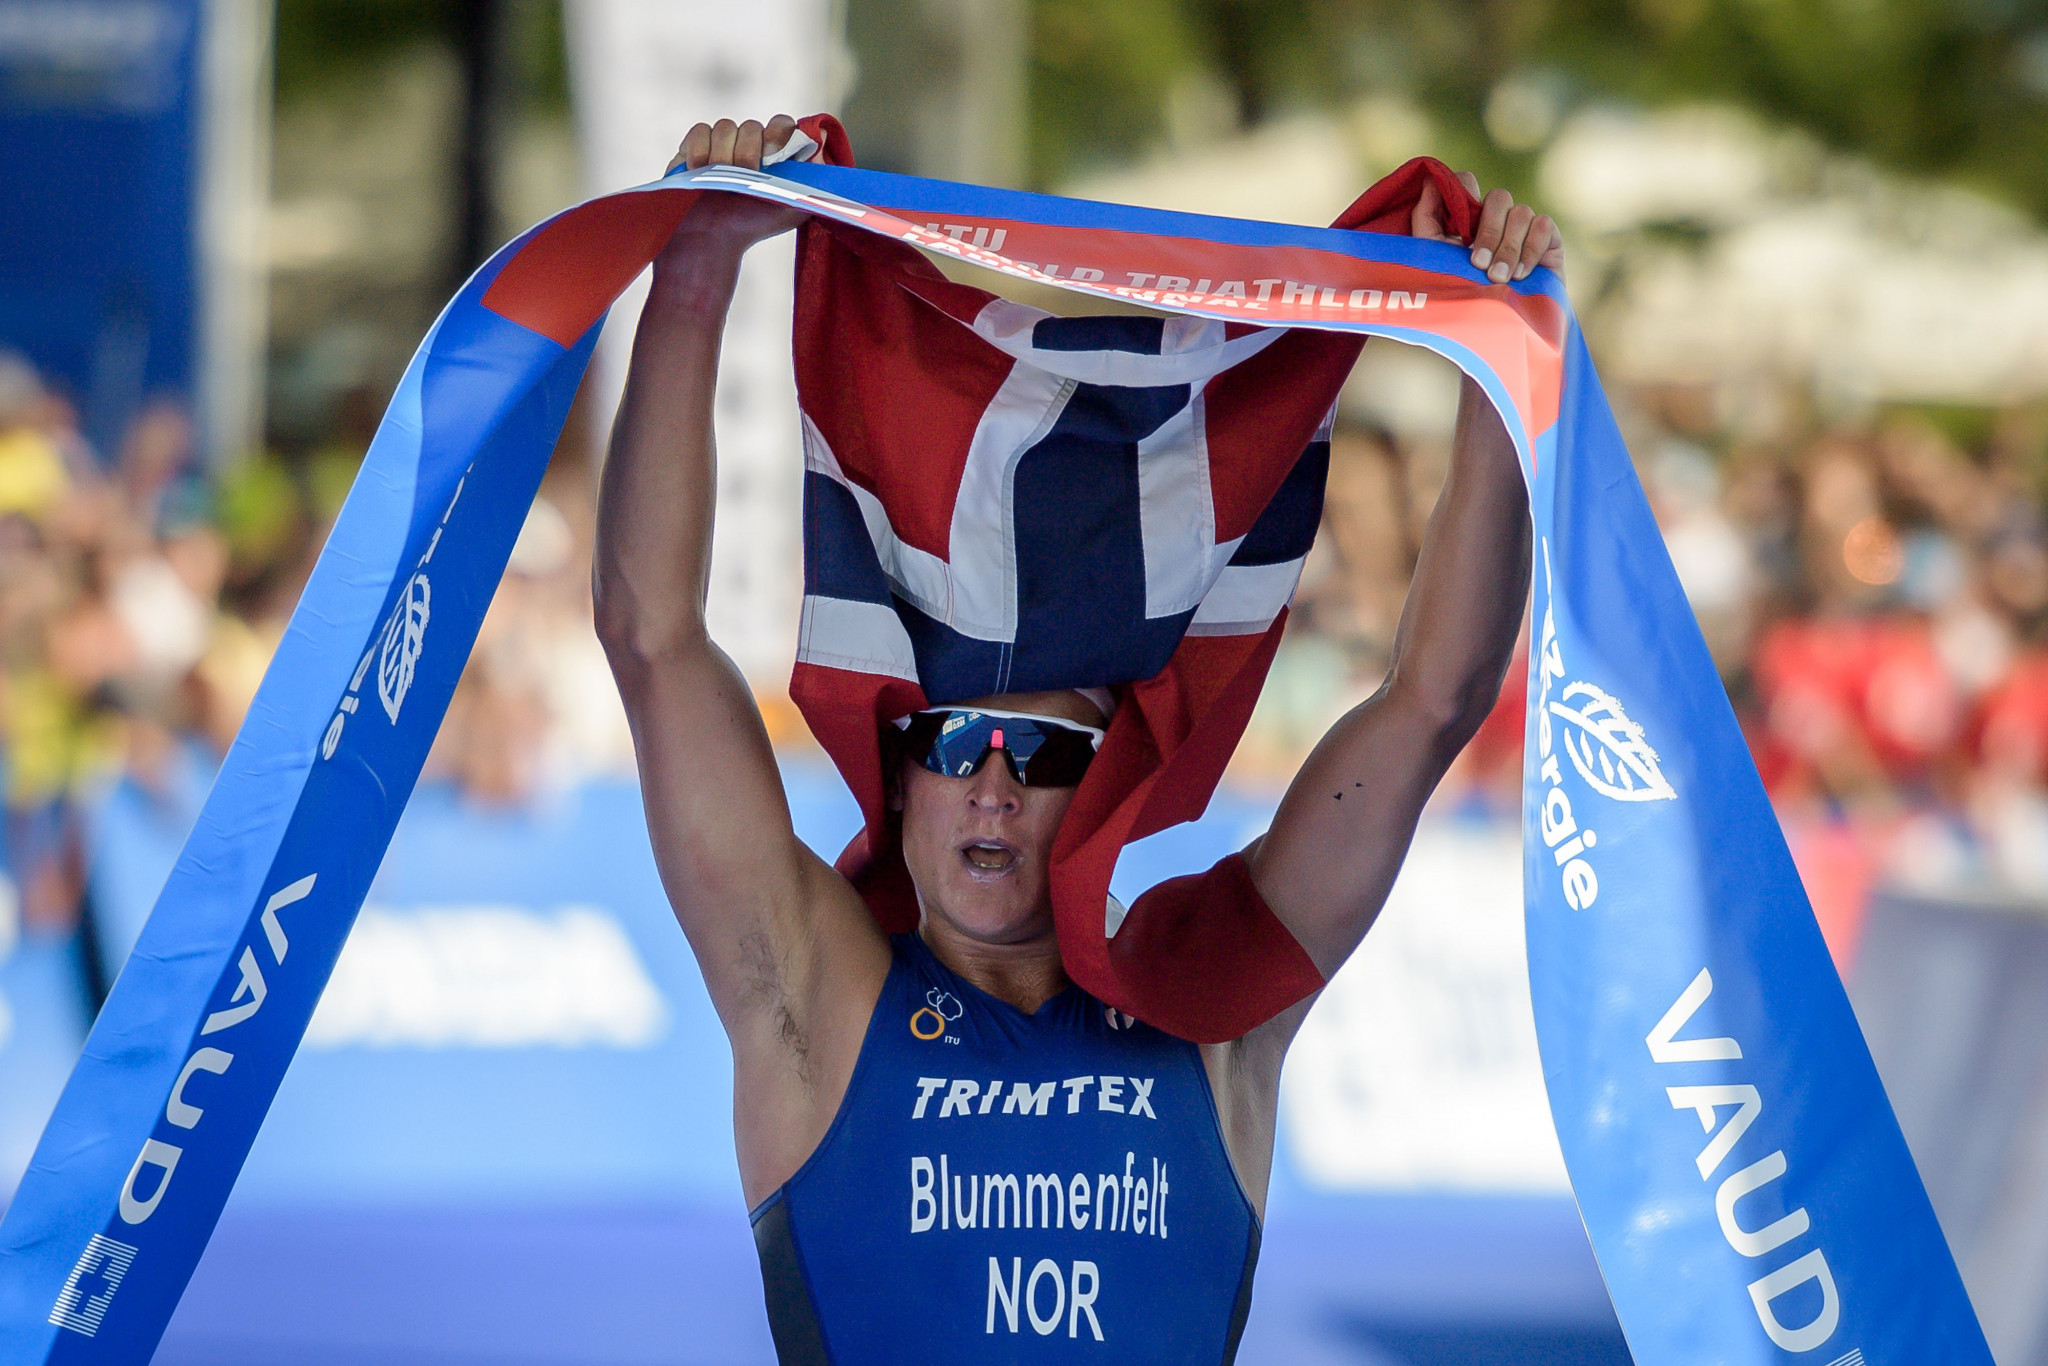 Kristian Blummenfelt made it back-to-back victories after winning the World Triathlon Cup event in Lisbon ©Getty Images